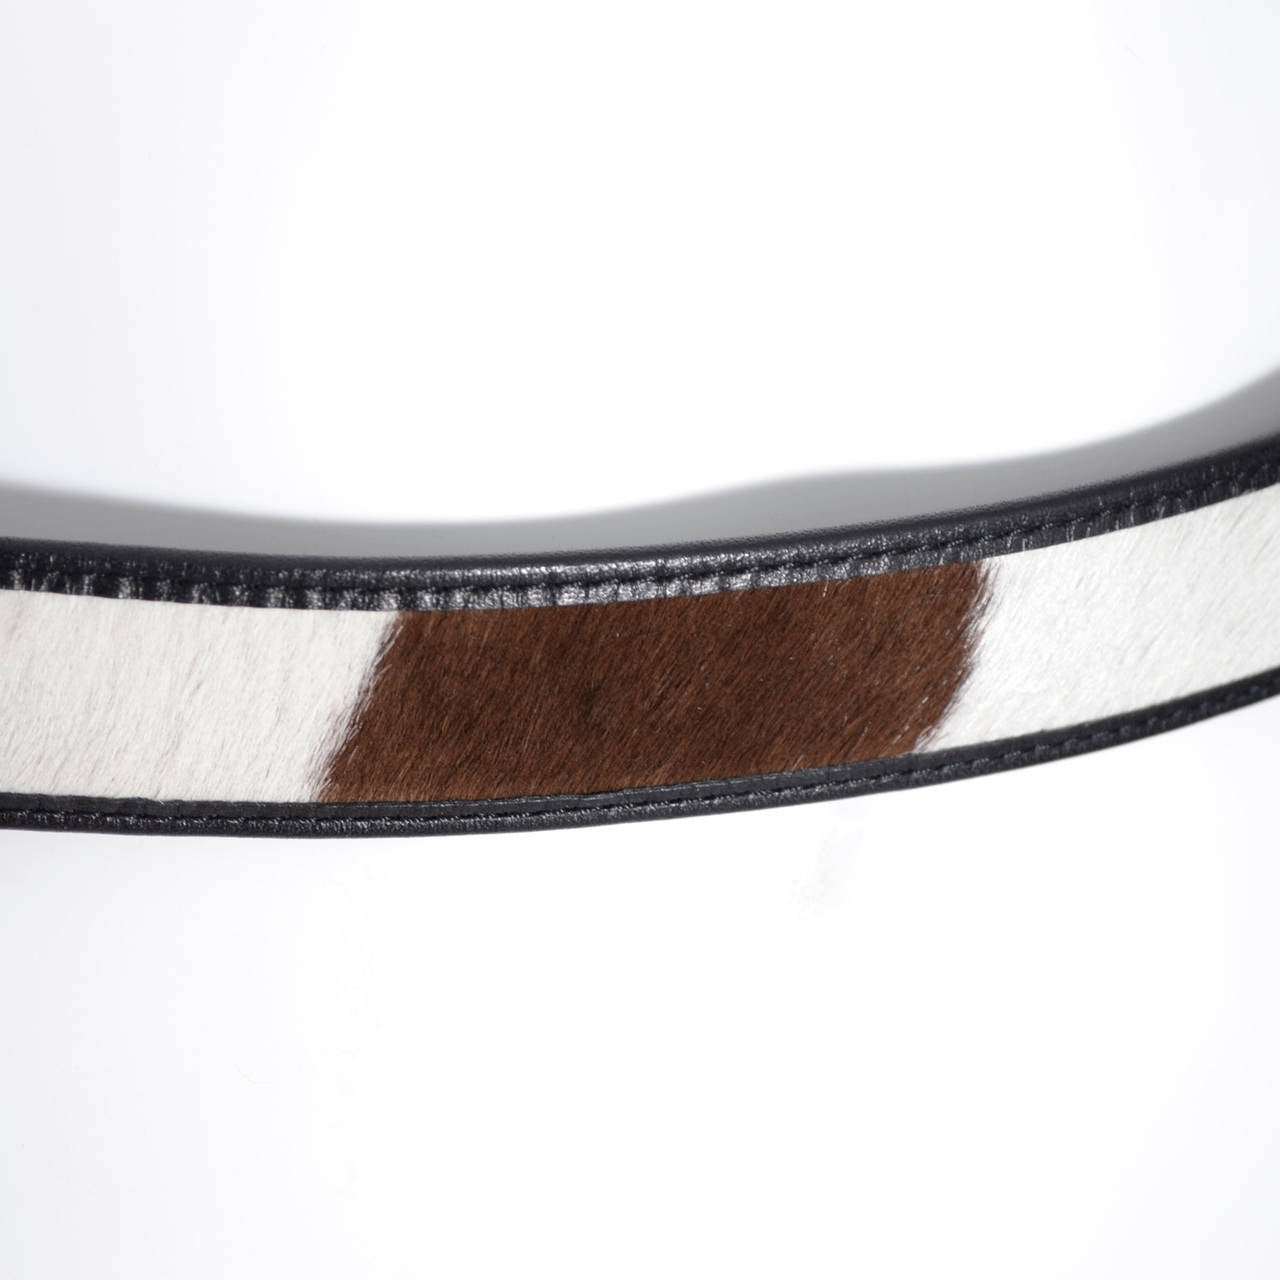 Vintage Comme des Garcons Belt in brown and white cow fur
on black leather from Comme des Garcons.  The belt is 1 inch wide and fits 26-33